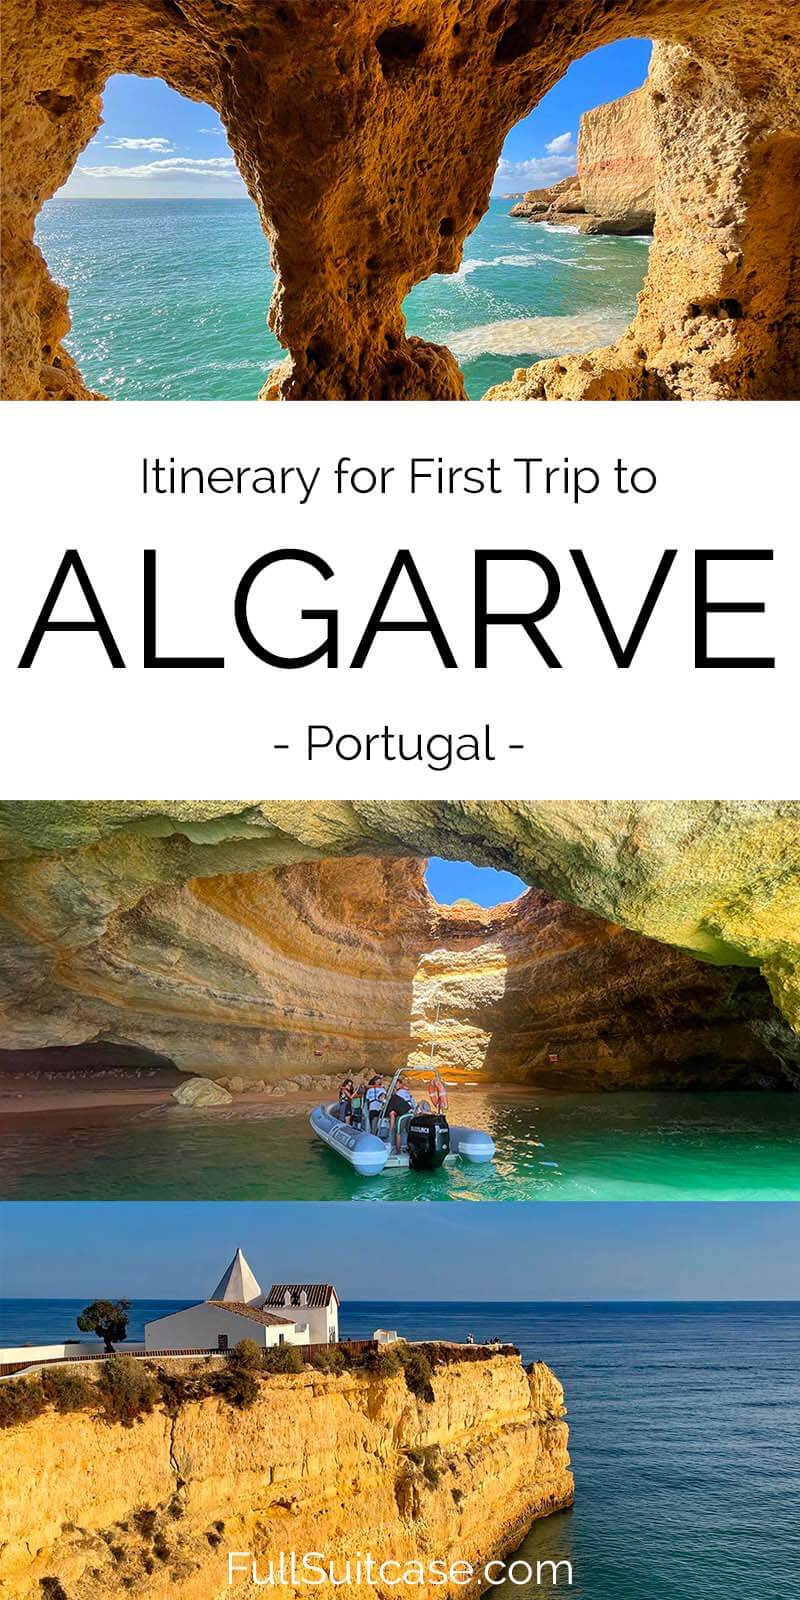 Road trip itinerary for first visit to Algarve Portugal